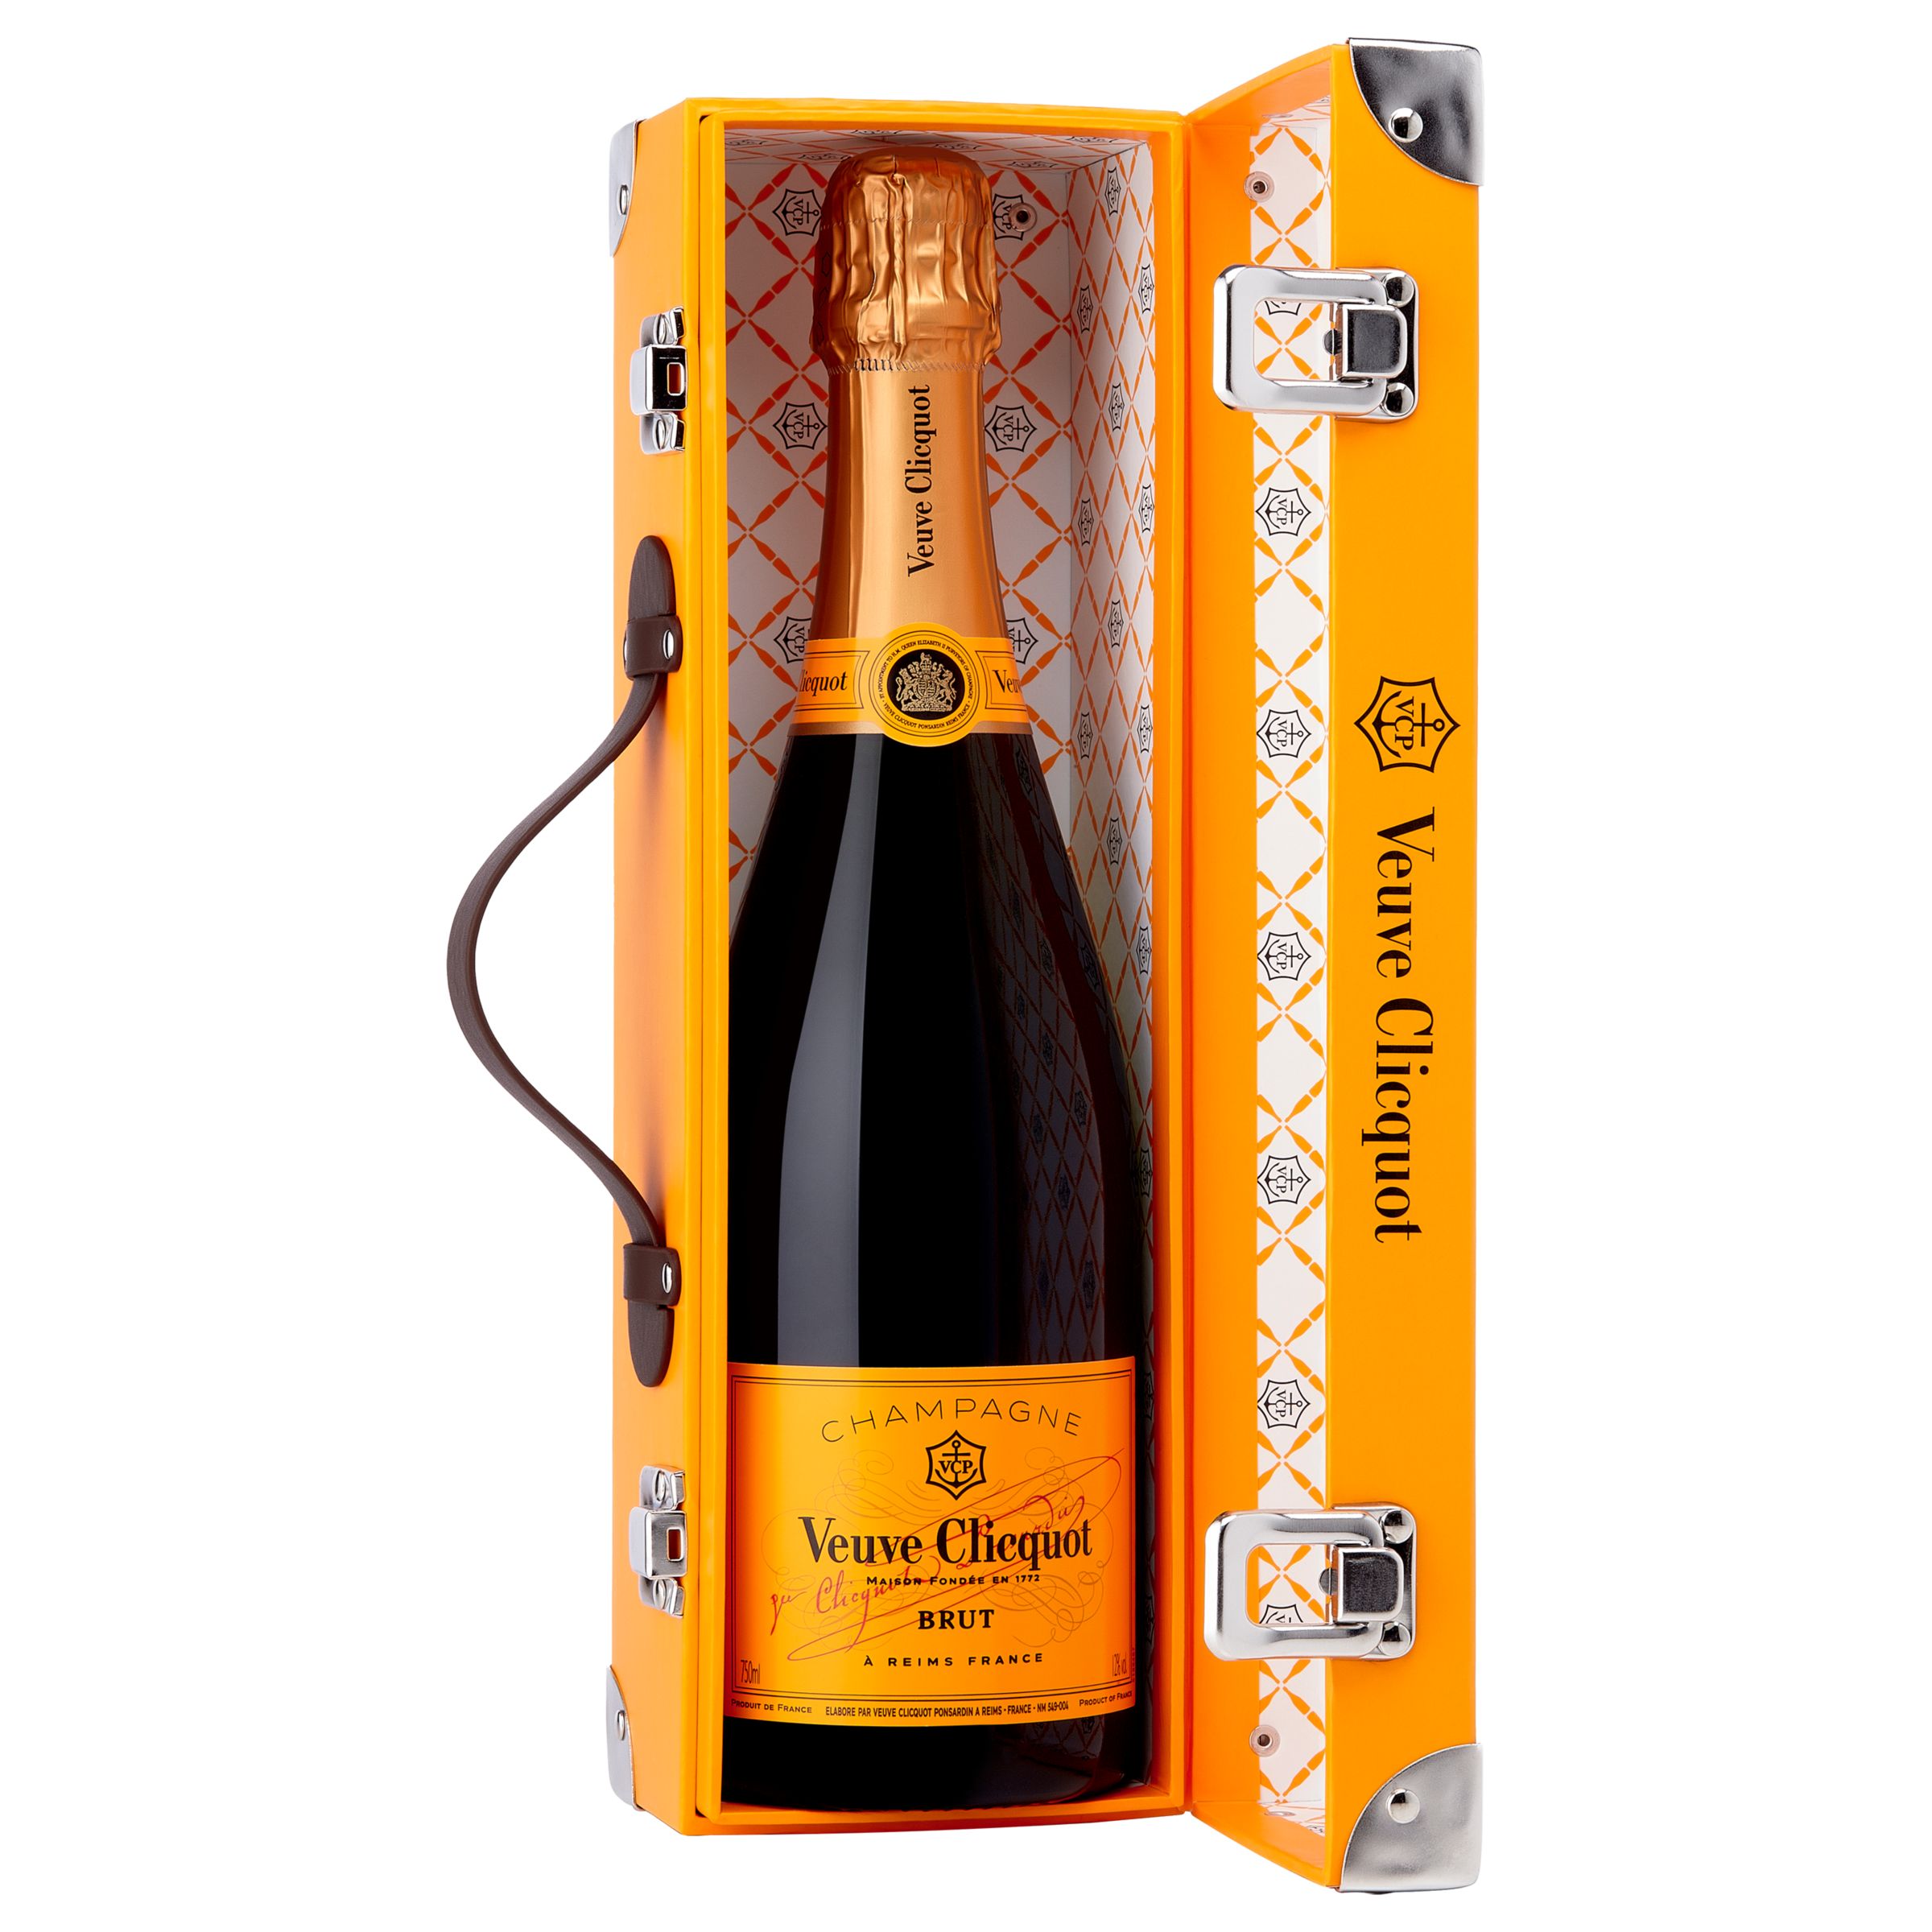 Veuve Cliquot Yellow Label Champagne Gift Trunk 75cl Online At Johnlewis Com